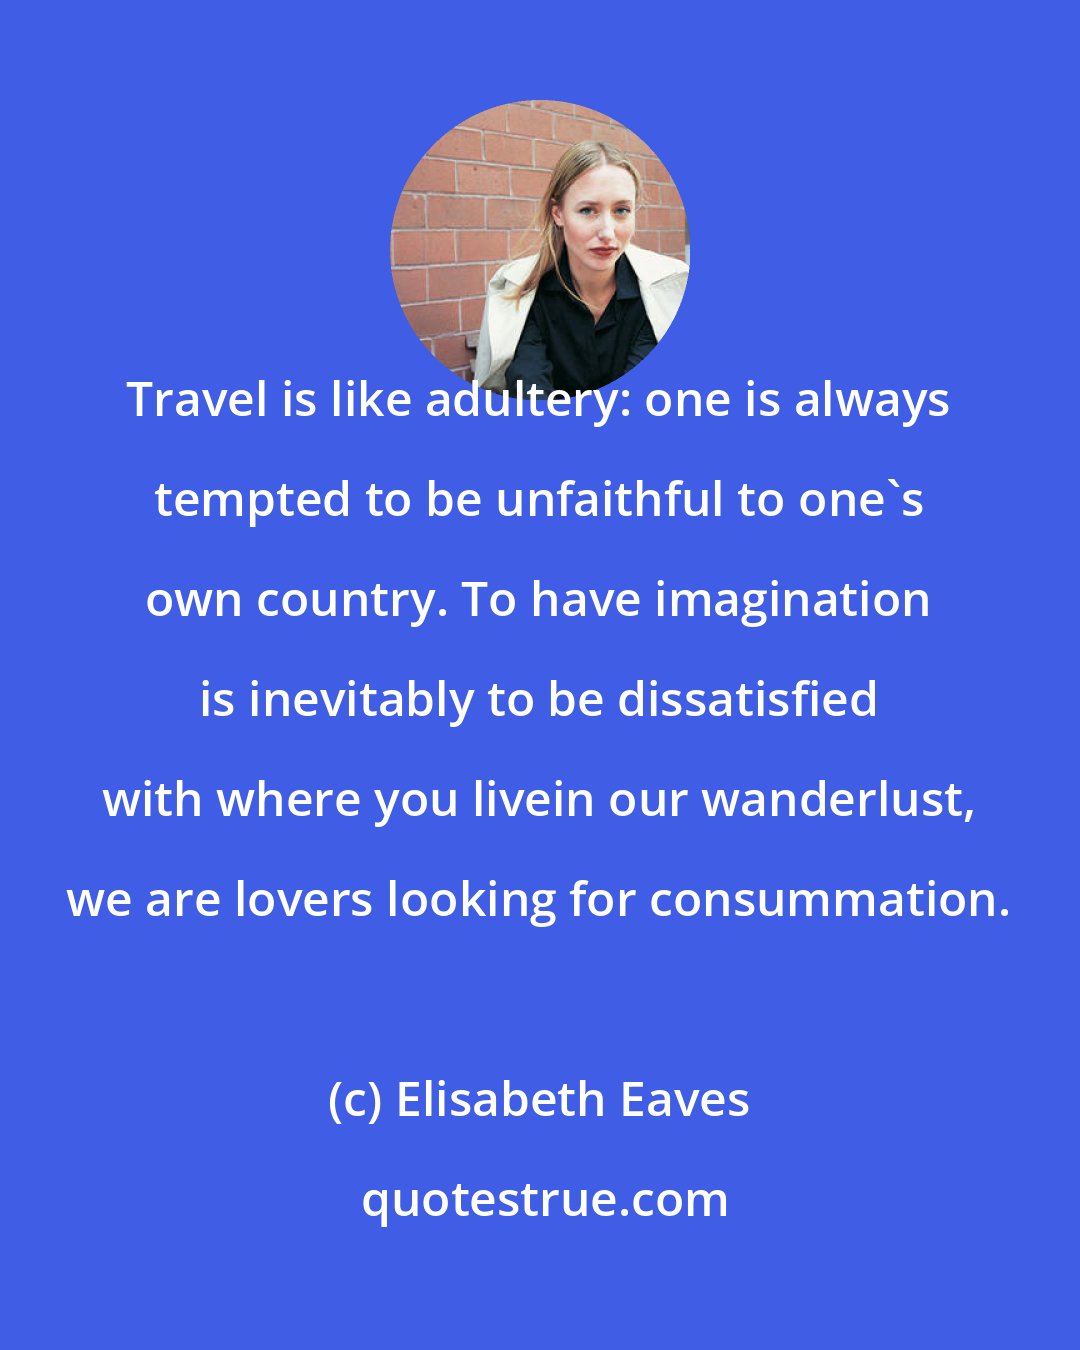 Elisabeth Eaves: Travel is like adultery: one is always tempted to be unfaithful to one's own country. To have imagination is inevitably to be dissatisfied with where you livein our wanderlust, we are lovers looking for consummation.